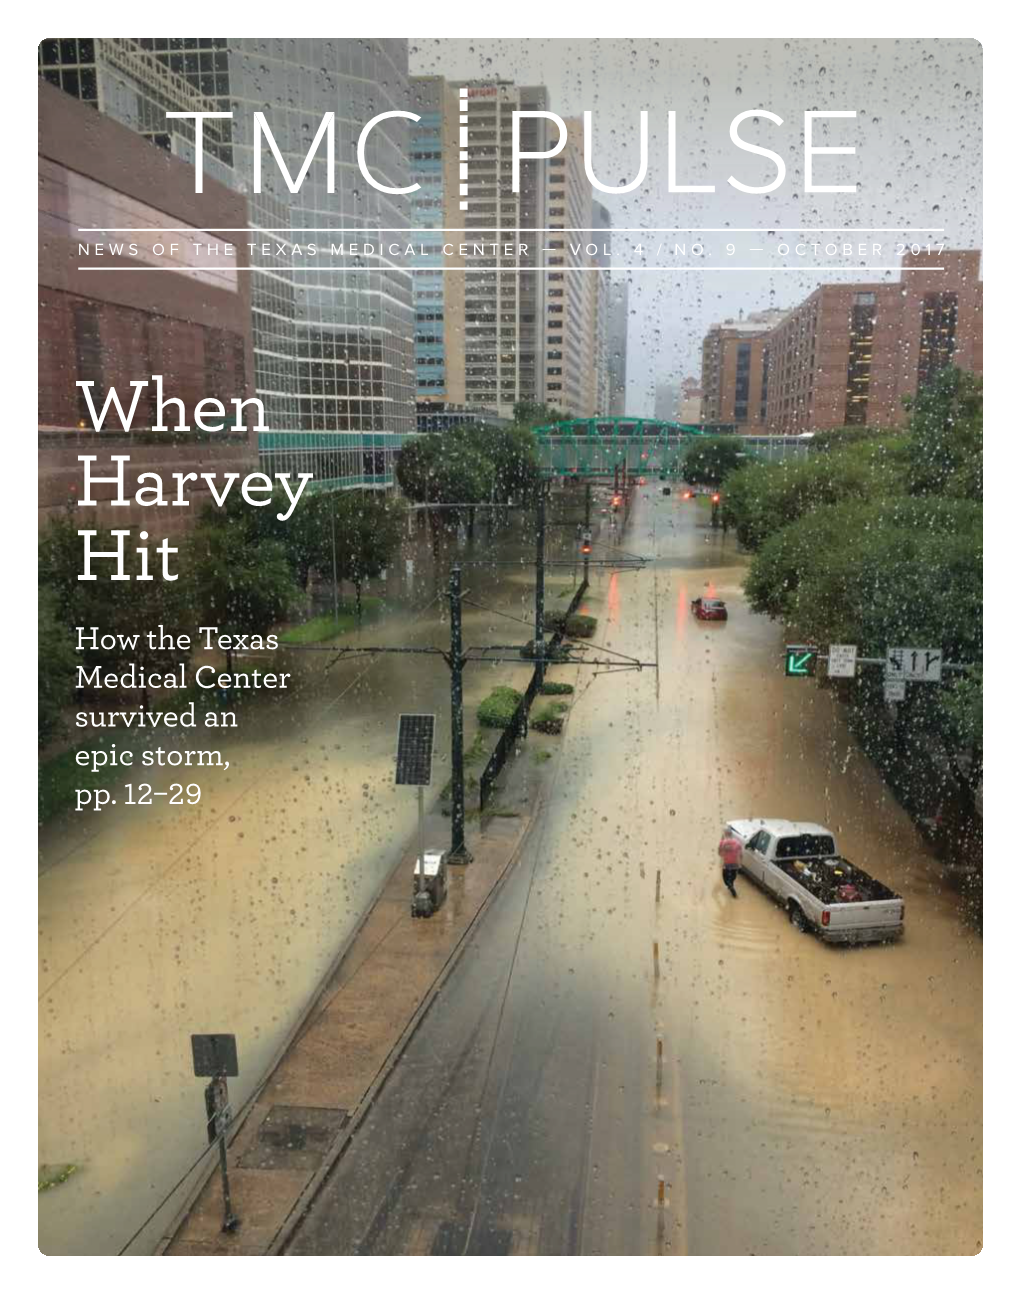 When Harvey Hit How the Texas Medical Center Survived an Epic Storm, Pp